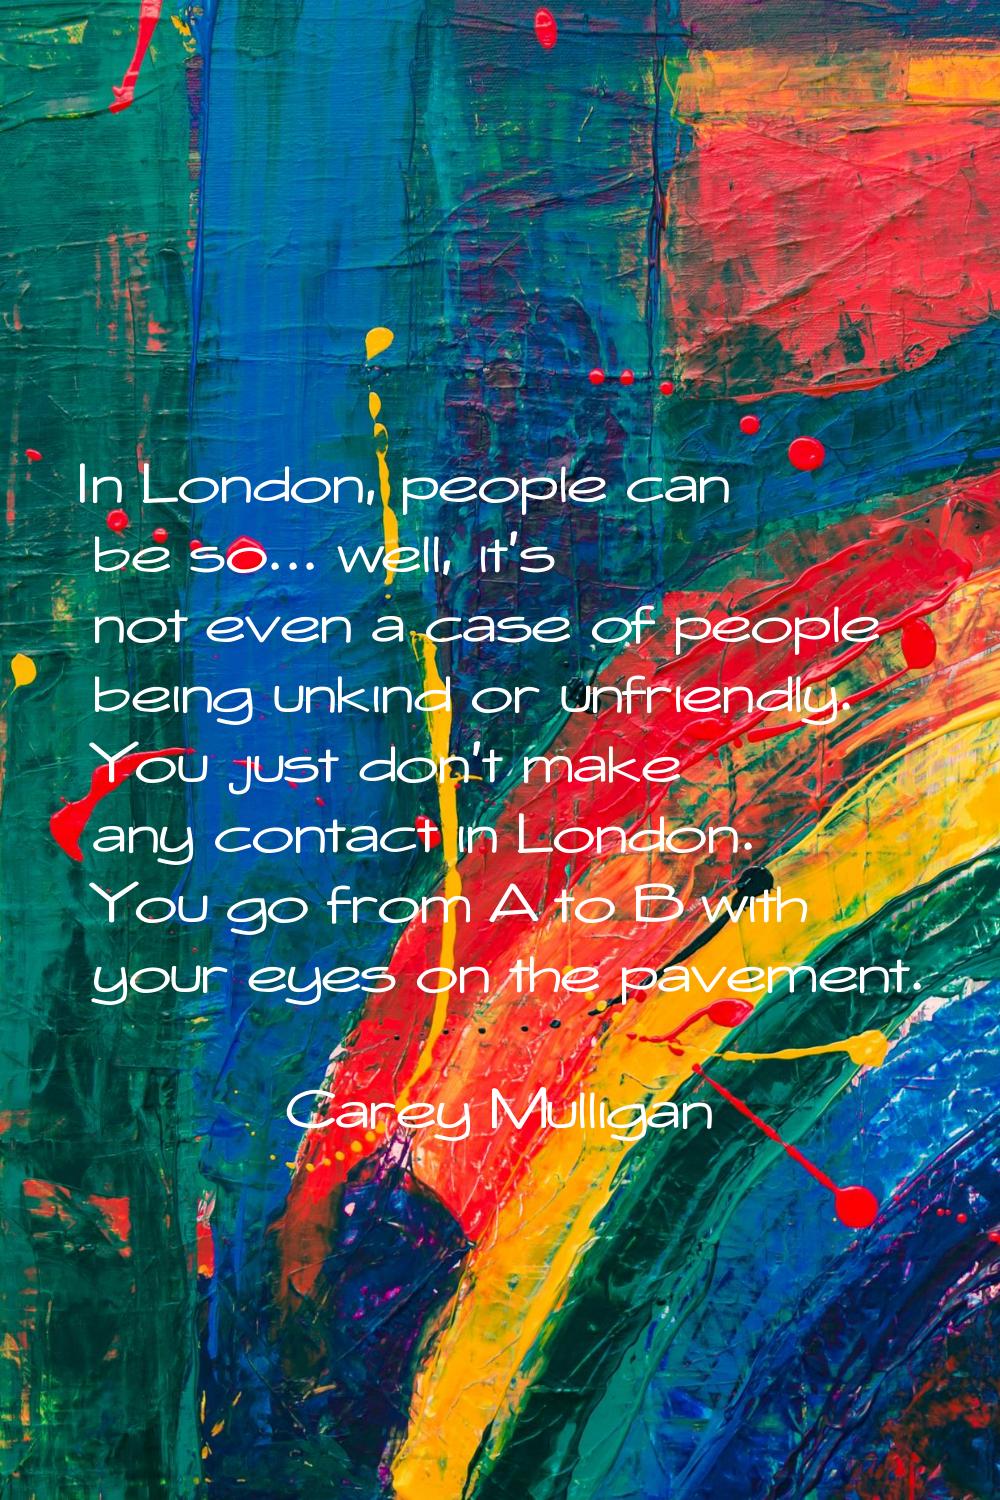 In London, people can be so... well, it's not even a case of people being unkind or unfriendly. You